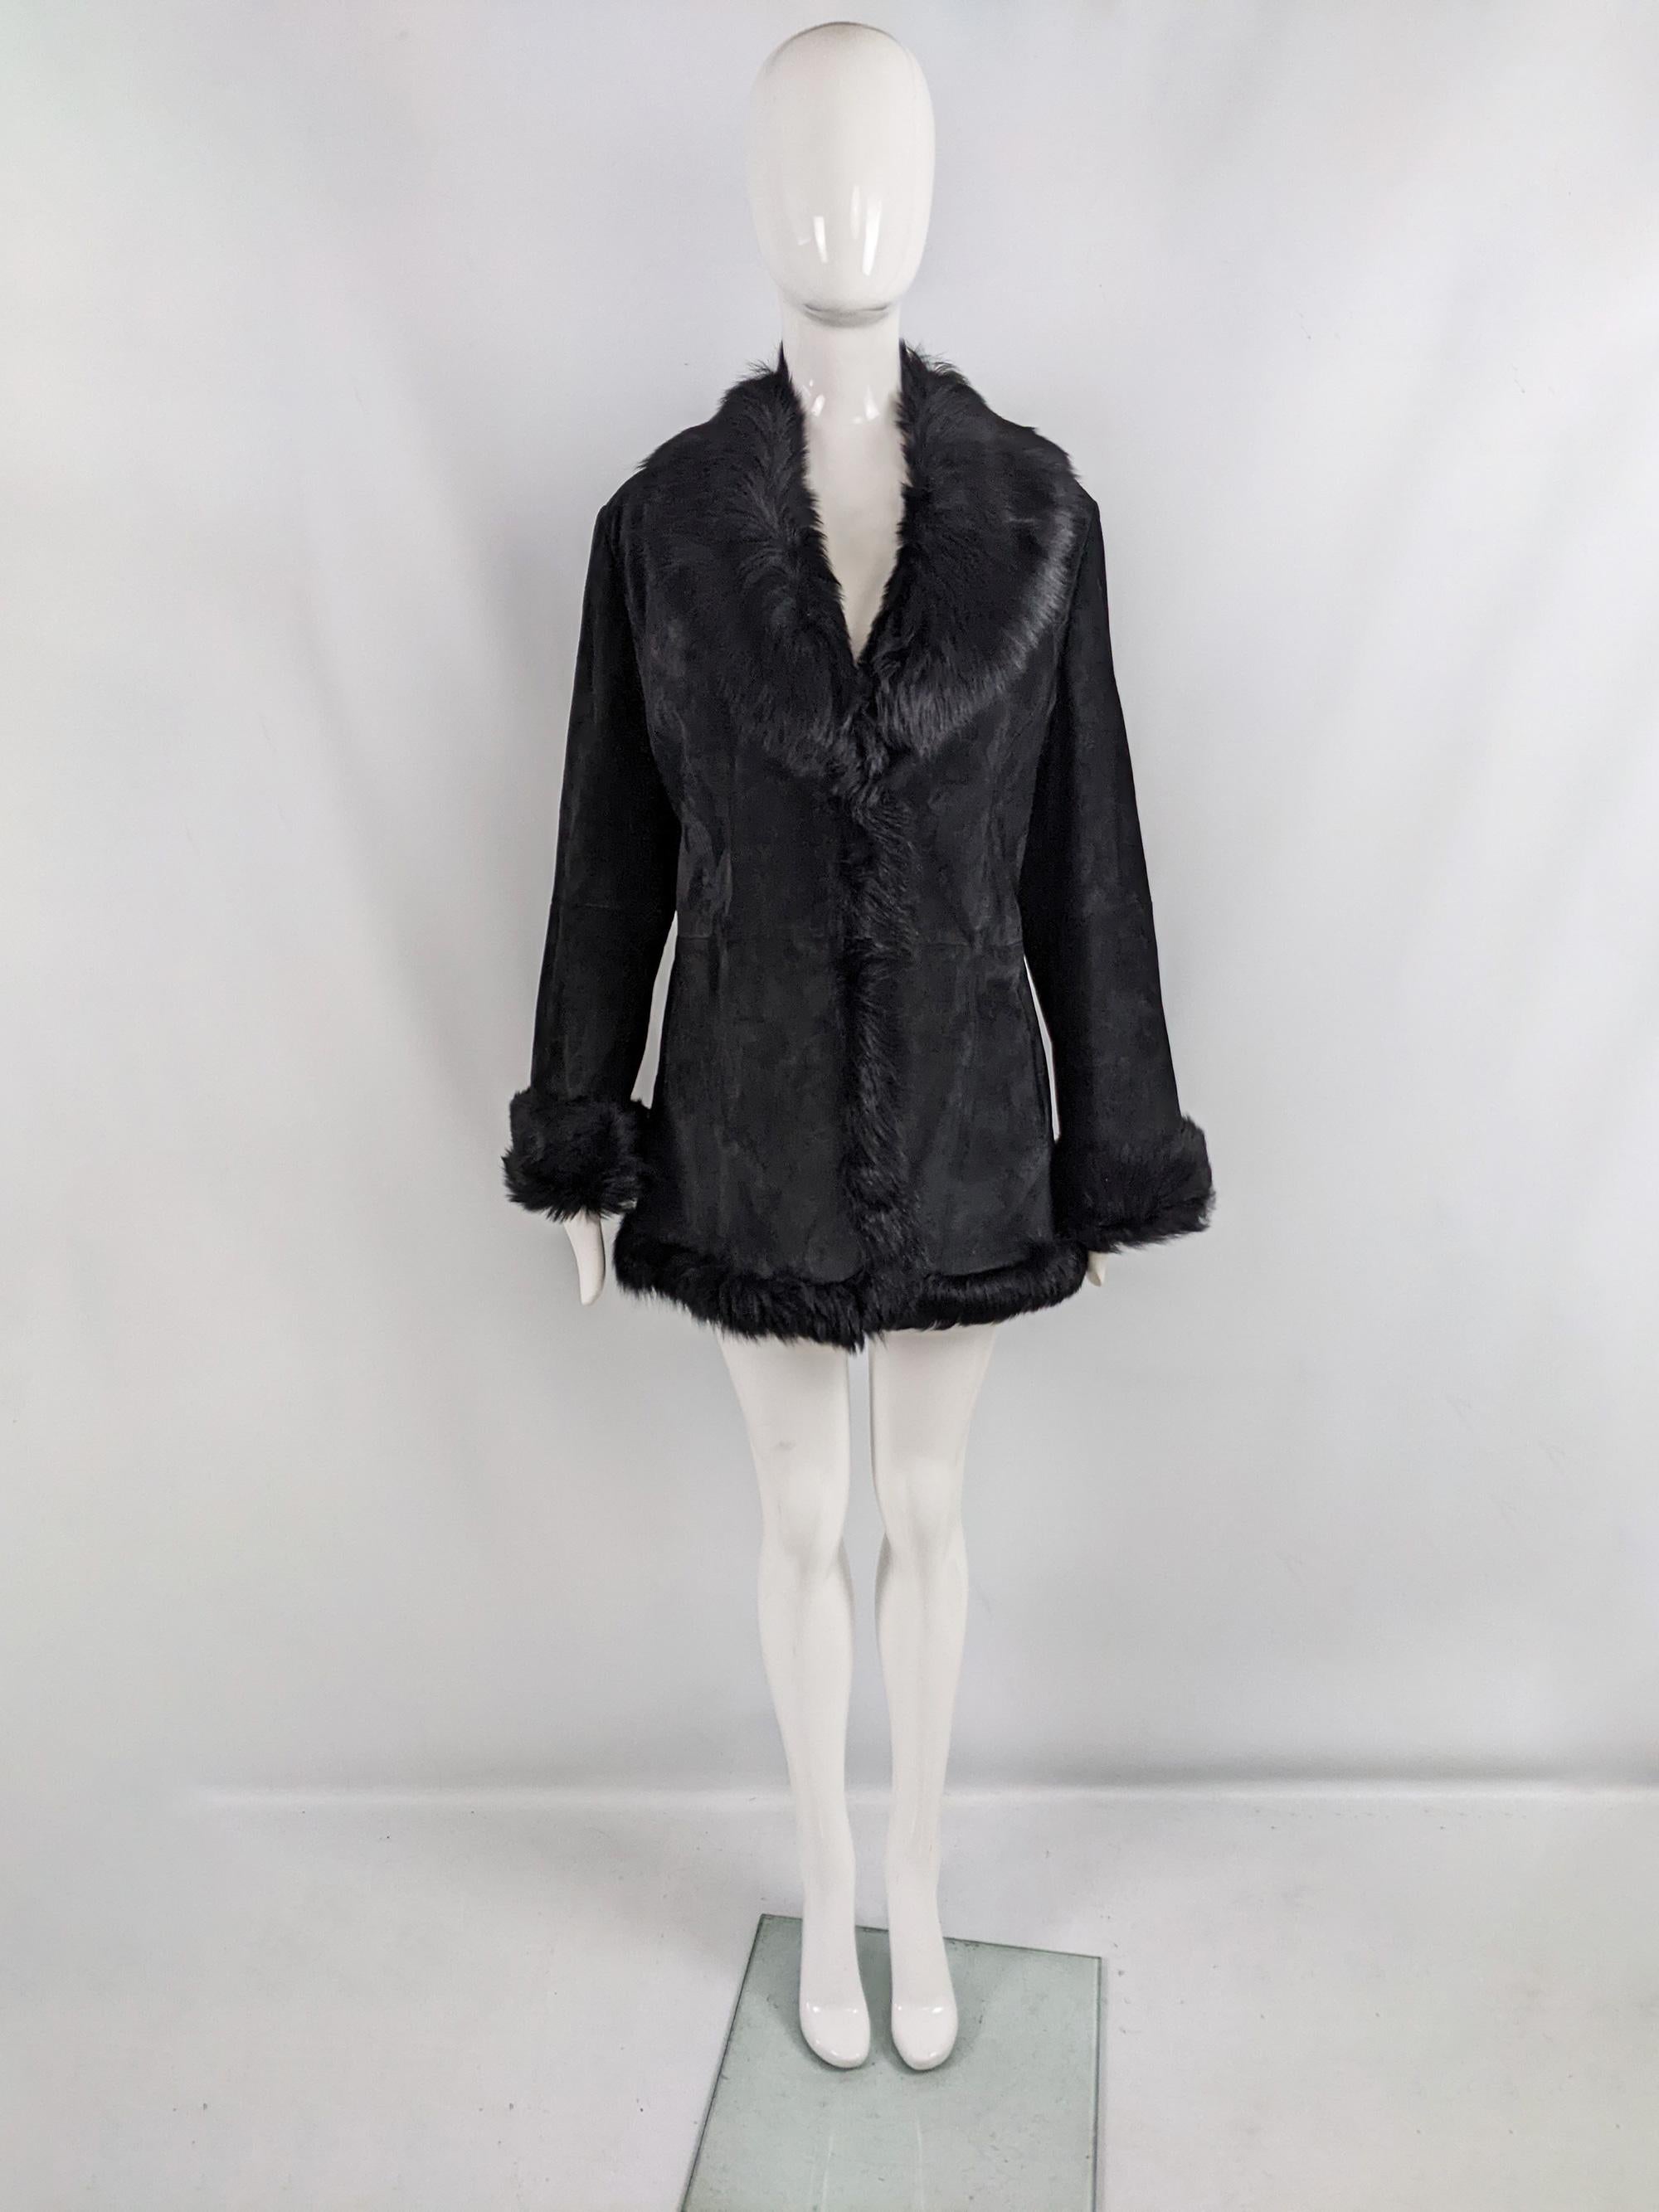 A glamorous vintage womens coat from the 90s by luxury Italian fashion house, for their Marella Sport line. In a black calf suede fabric with a real lamb shearling trim on the collar, hem and cuffs.

Size: Marked GB 14/ EU 44 / US 10. Please check